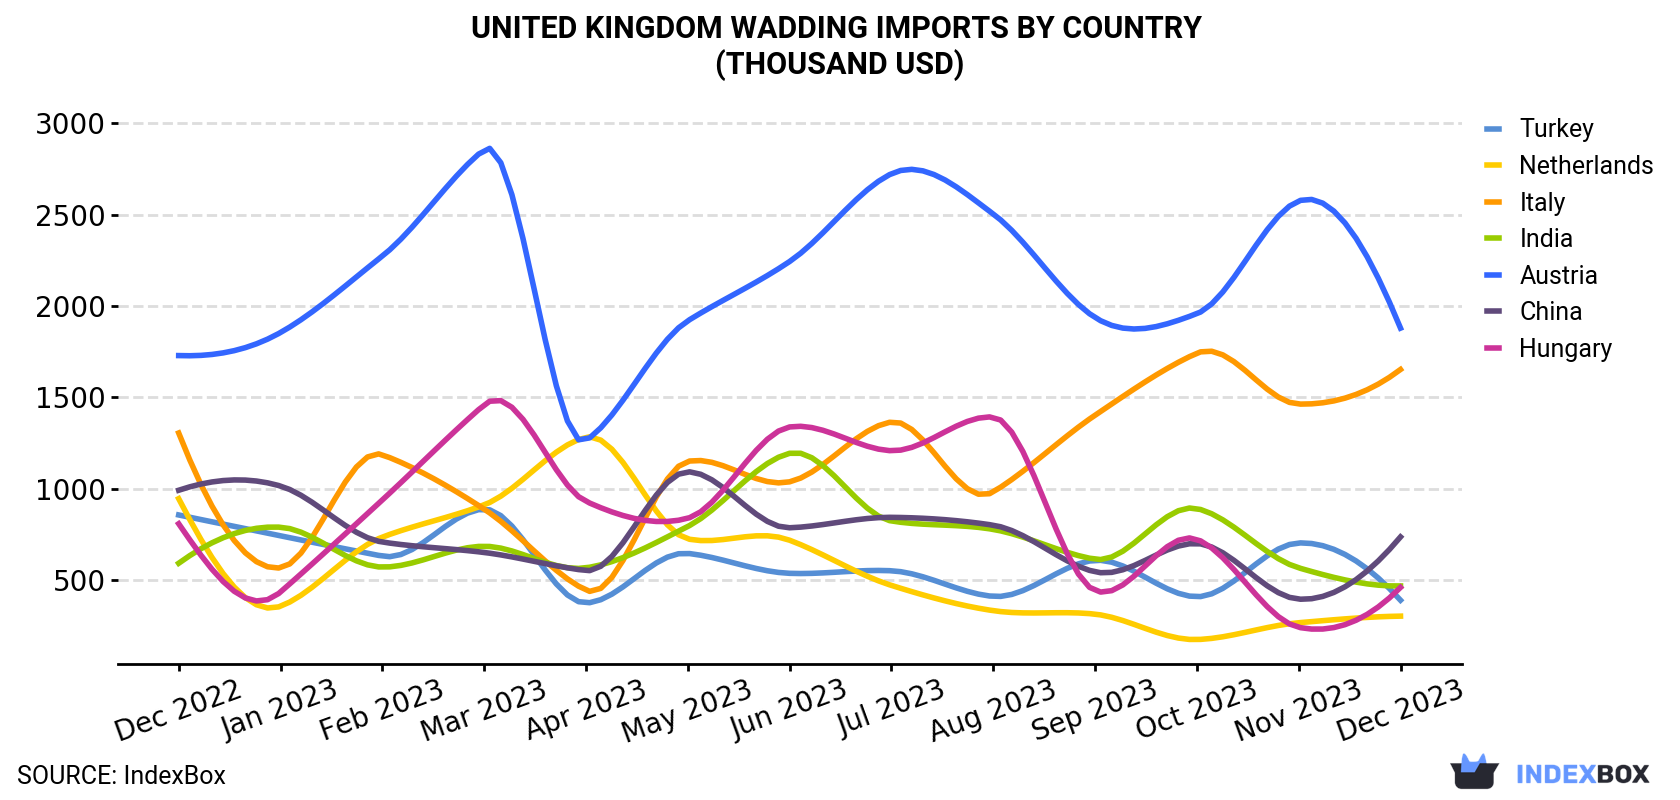 United Kingdom Wadding Imports By Country (Thousand USD)